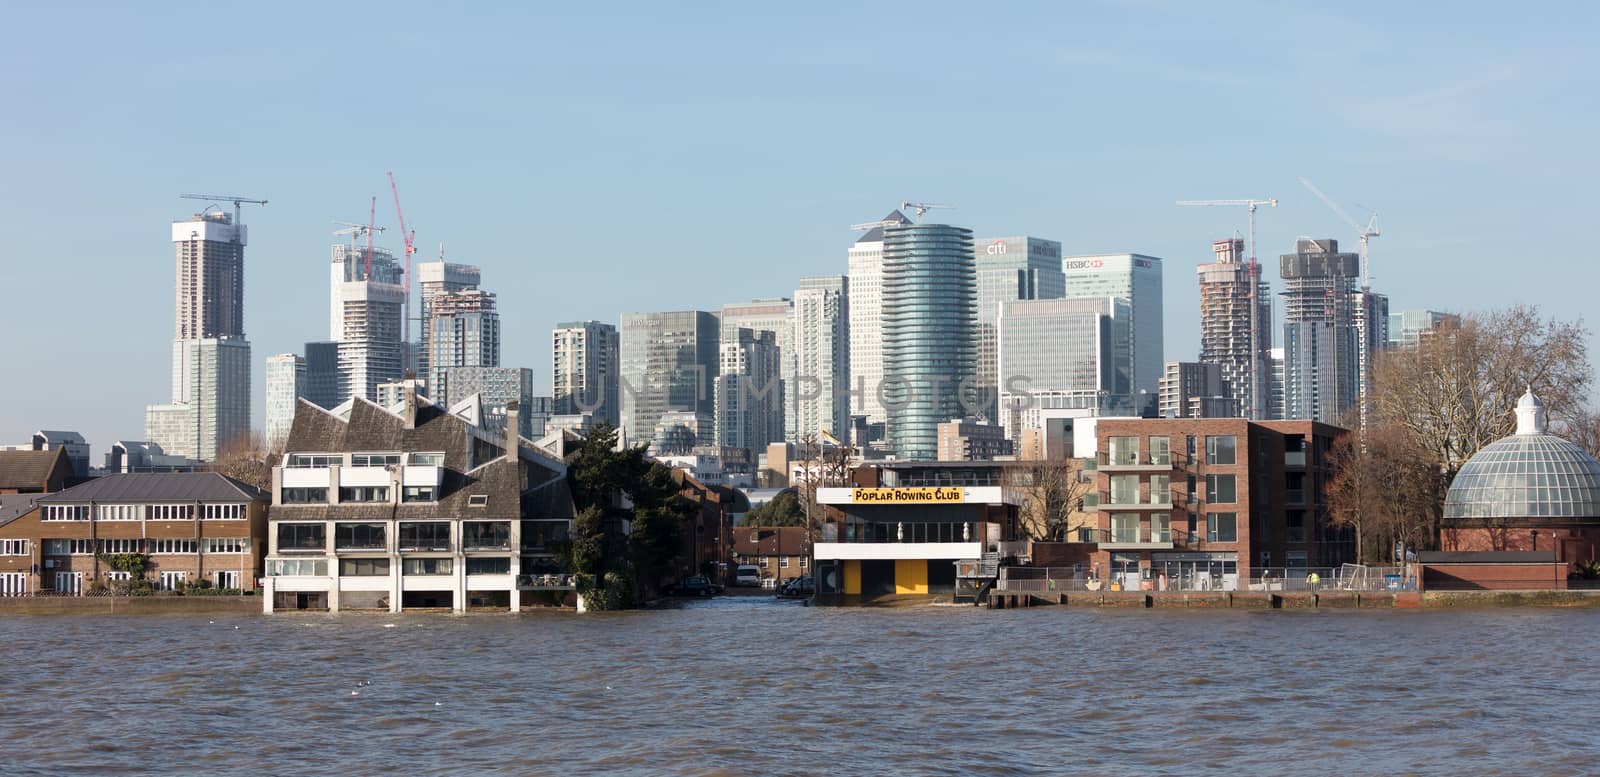 London, United Kingdom - Februari 21, 2019: London skyline buildings in Canary Warf, view from the Thames